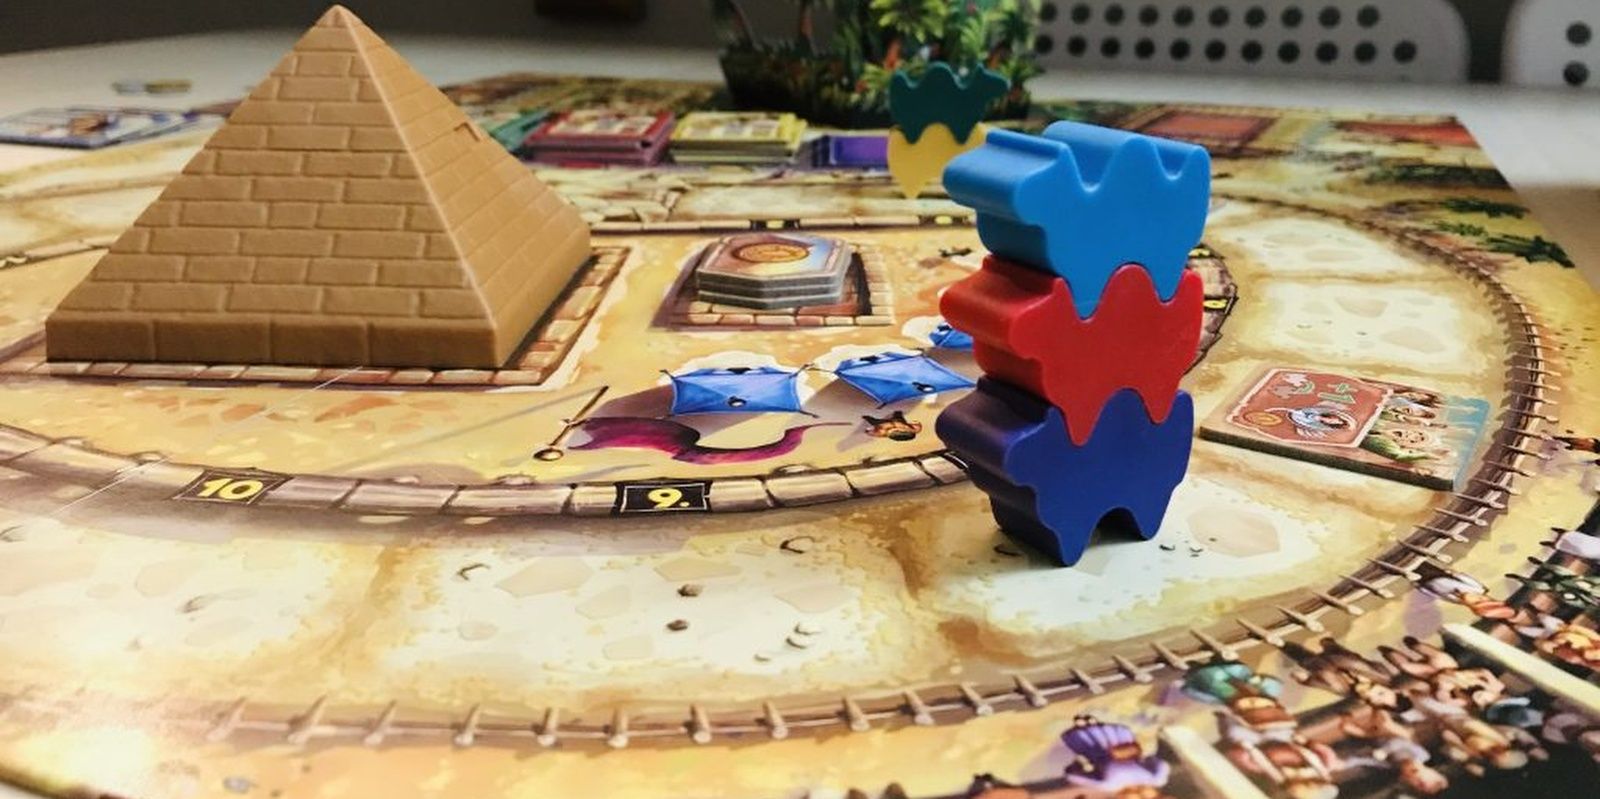 Camel Up Board Game Being Played